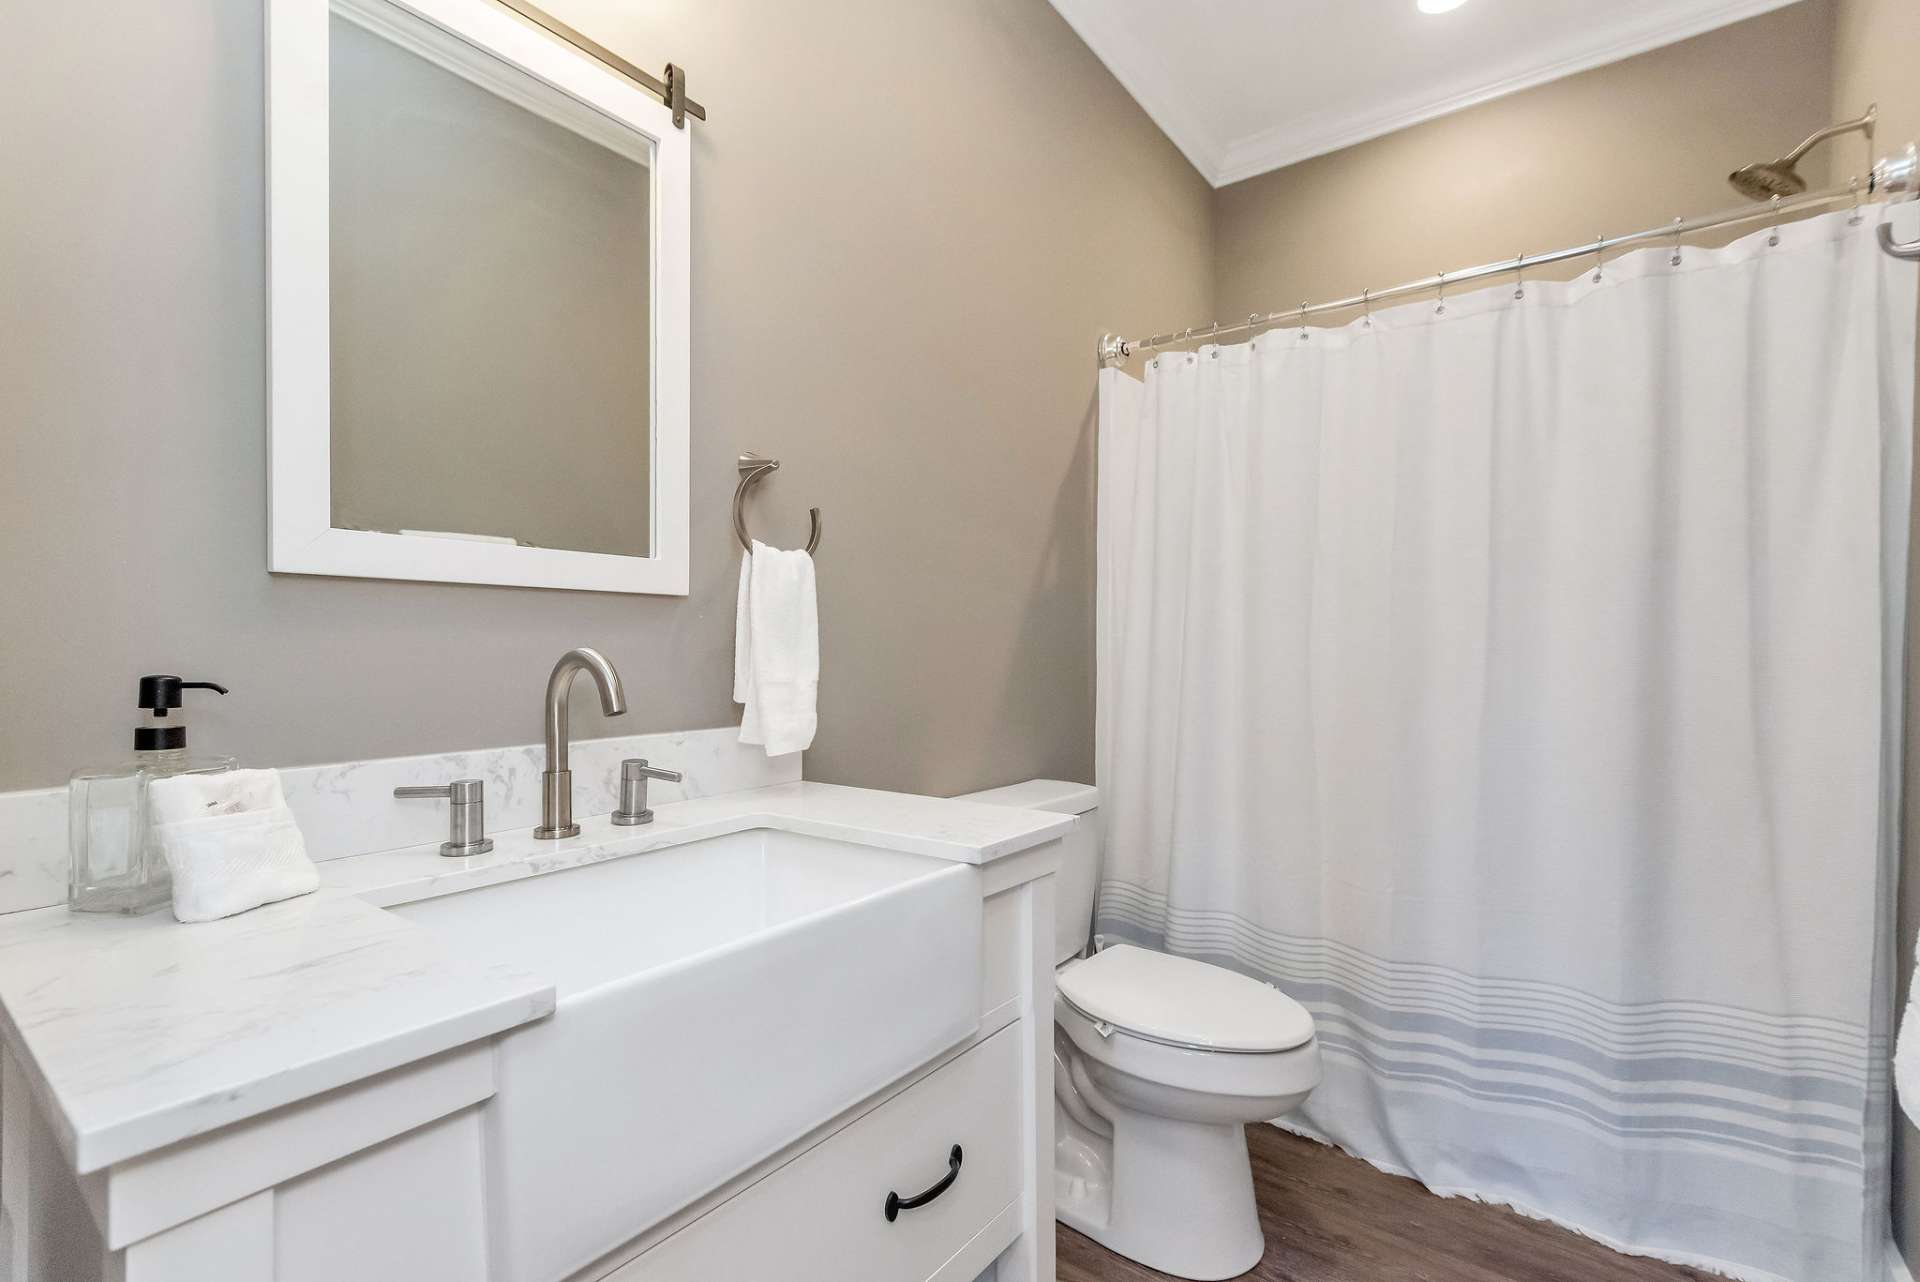 Your guests will love the modern vanities in each bath.